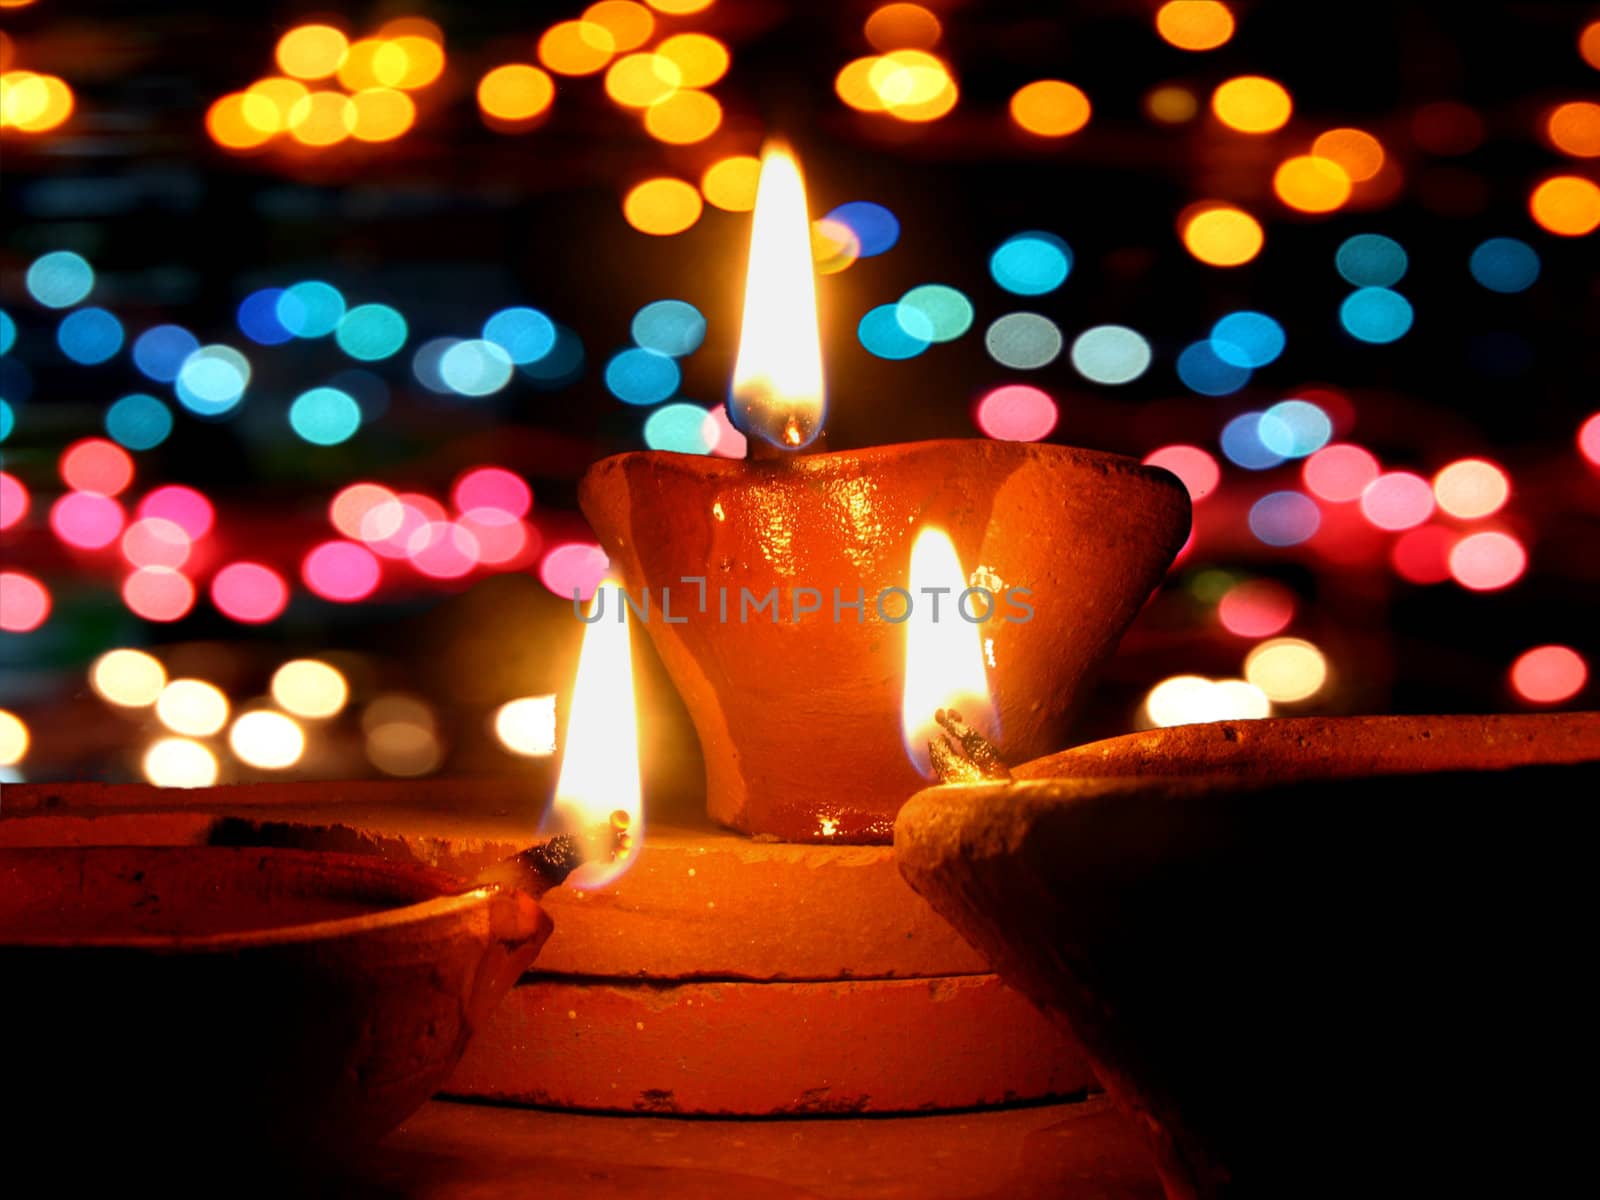 Traditional lamps lit in front of colorful lighting, during Diwali festival in India.